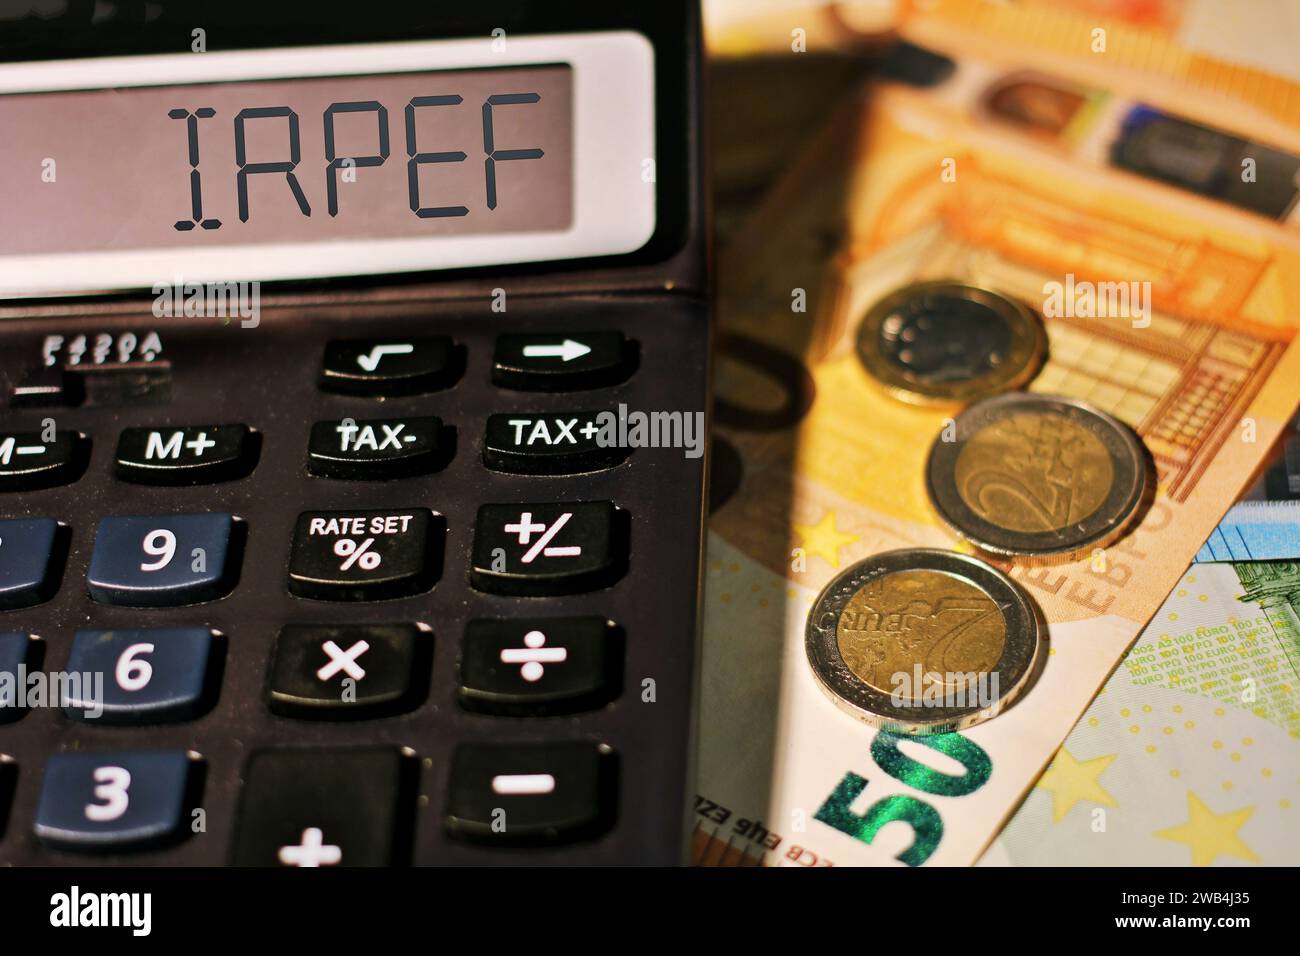 Calculator with the text 'Irpef' italian tax. Stock Photo